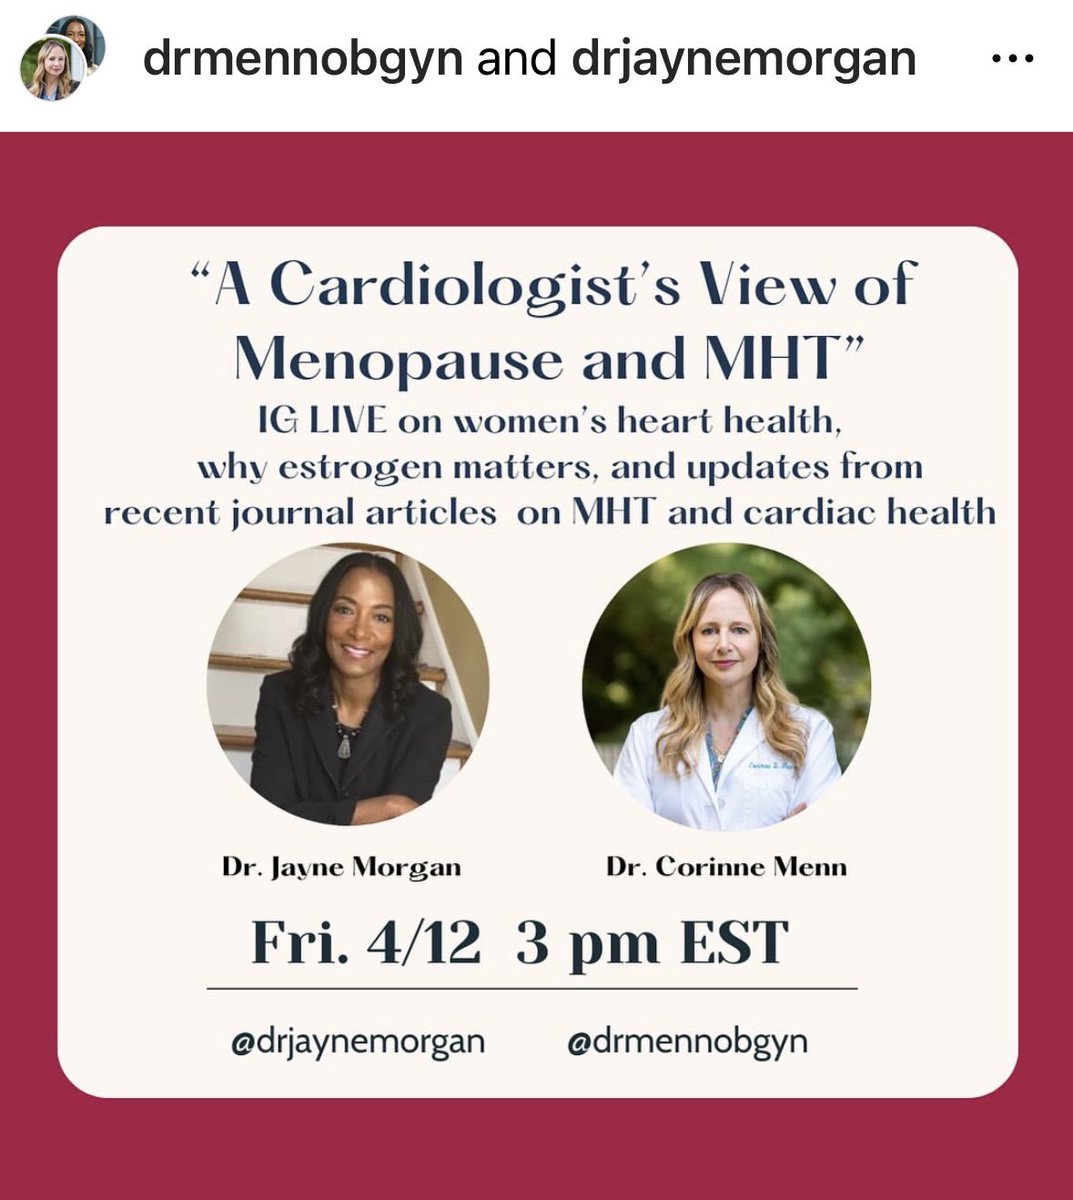 Fresh from my medical conferences this week, I will discuss today at 3 pm on IG Live!